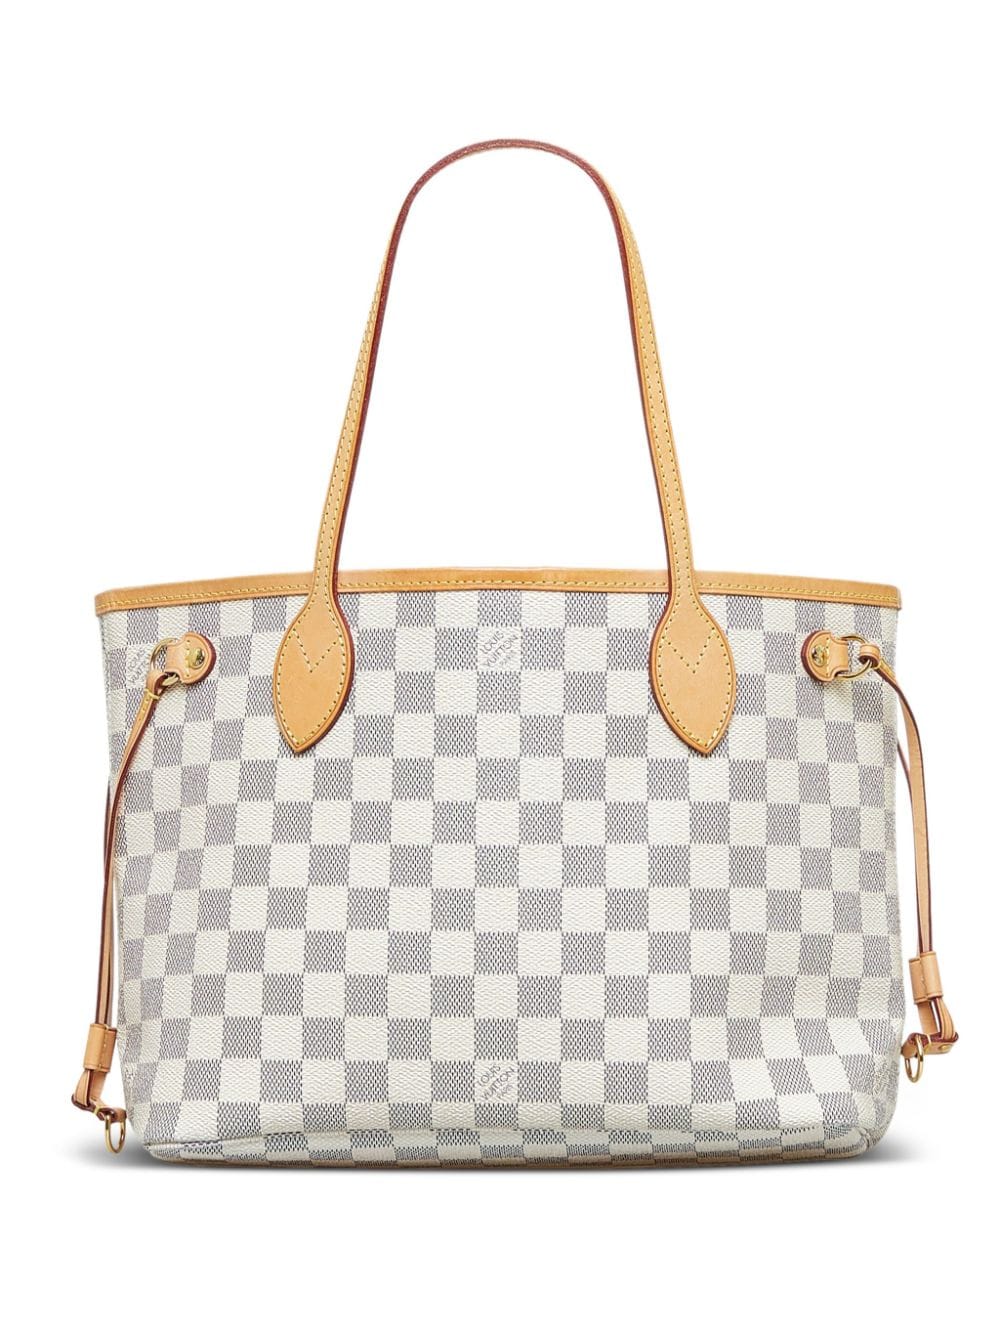 Louis Vuitton 2010 pre-owned Neverfull PM tote bag, White